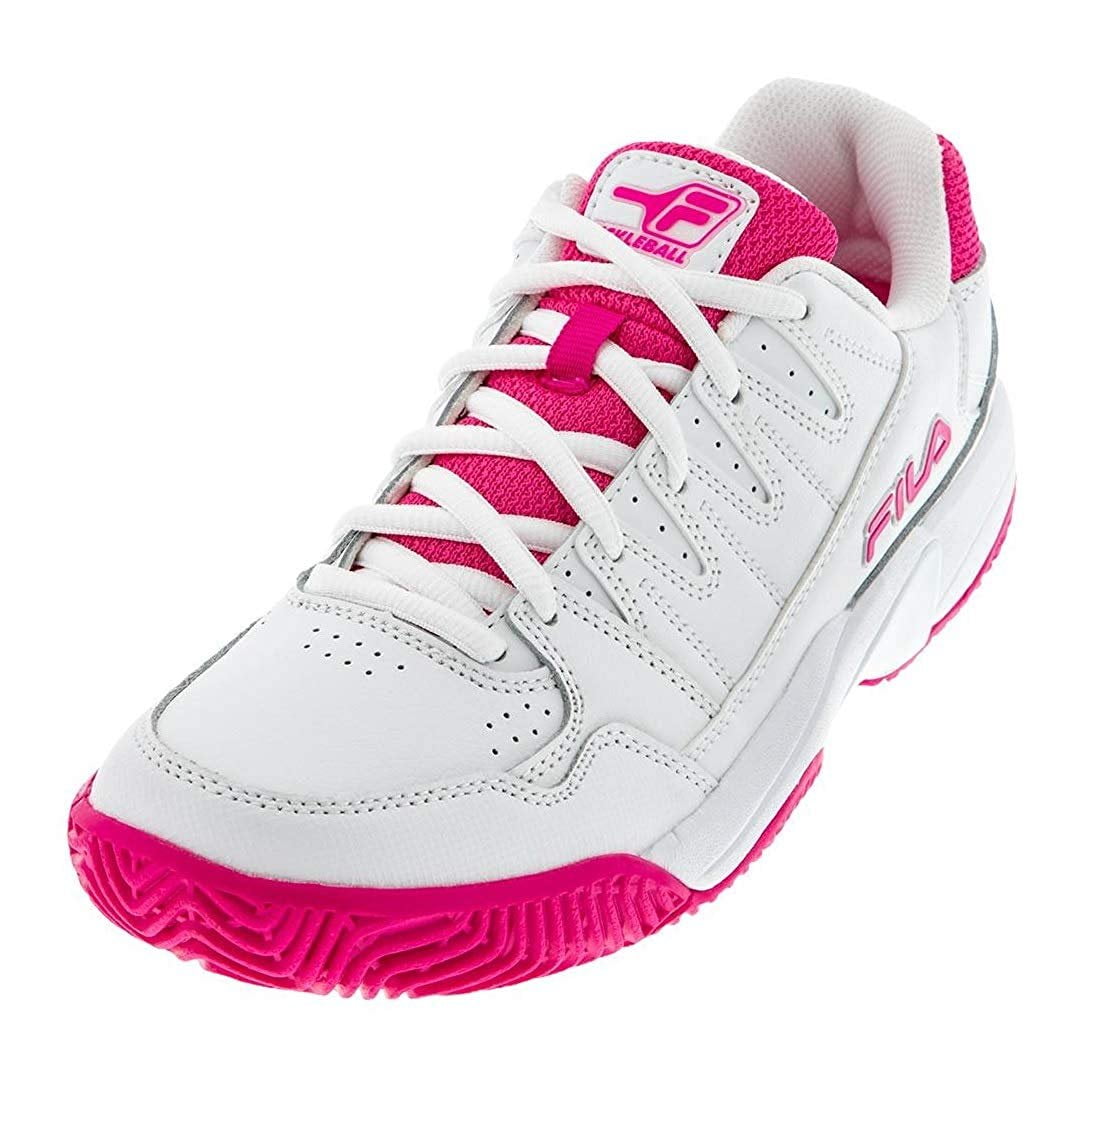 pink and white tennis shoes